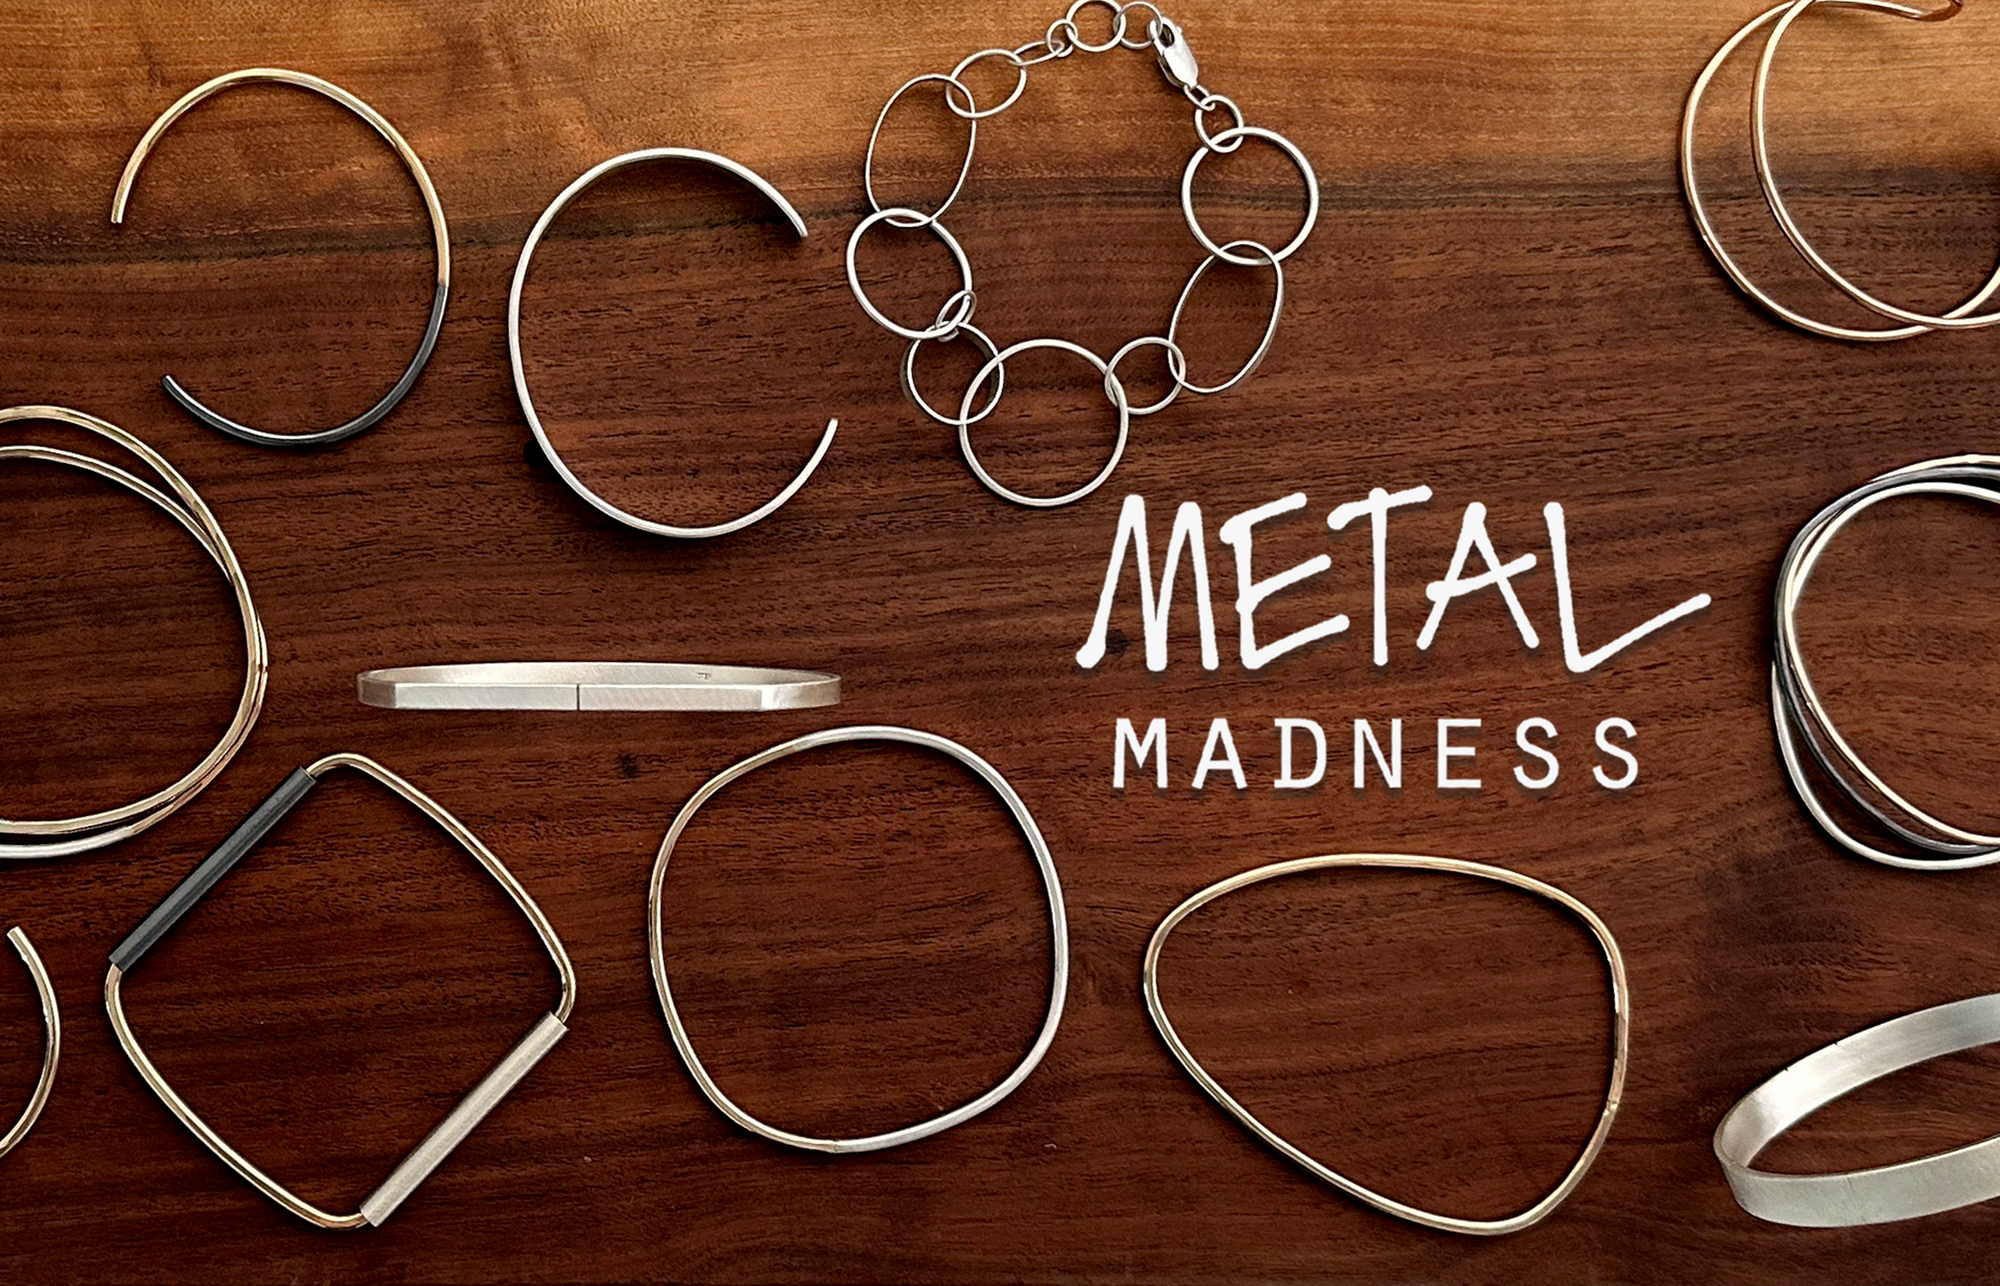 Blog: What is Metal Madness, anyway?